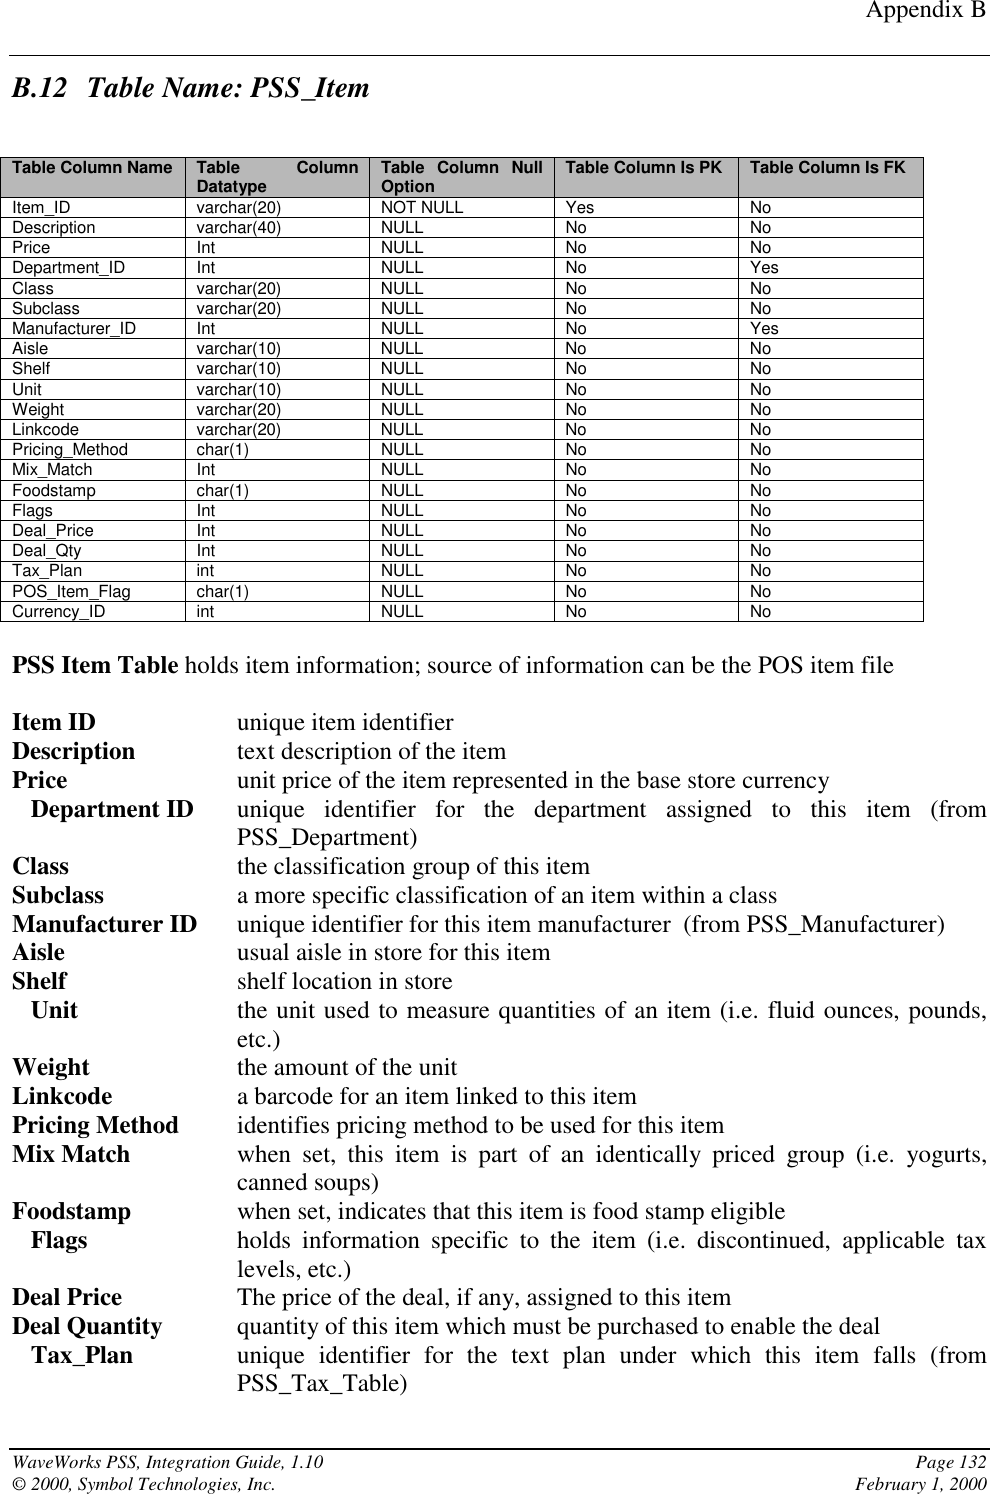 Appendix BWaveWorks PSS, Integration Guide, 1.10 Page 132© 2000, Symbol Technologies, Inc. February 1, 2000B.12 Table Name: PSS_ItemTable Column Name Table ColumnDatatype Table Column NullOption Table Column Is PK Table Column Is FKItem_ID varchar(20) NOT NULL Yes NoDescription varchar(40) NULL No NoPrice Int NULL No NoDepartment_ID Int NULL No YesClass varchar(20) NULL No NoSubclass varchar(20) NULL No NoManufacturer_ID Int NULL No YesAisle varchar(10) NULL No NoShelf varchar(10) NULL No NoUnit varchar(10) NULL No NoWeight varchar(20) NULL No NoLinkcode varchar(20) NULL No NoPricing_Method char(1) NULL No NoMix_Match Int NULL No NoFoodstamp char(1) NULL No NoFlags Int NULL No NoDeal_Price Int NULL No NoDeal_Qty Int NULL No NoTax_Plan int NULL No NoPOS_Item_Flag char(1) NULL No NoCurrency_ID int NULL No NoPSS Item Table holds item information; source of information can be the POS item fileItem ID unique item identifierDescription text description of the itemPrice unit price of the item represented in the base store currency               Department ID unique identifier for the department assigned to this item (fromPSS_Department)Class the classification group of this itemSubclass a more specific classification of an item within a classManufacturer ID unique identifier for this item manufacturer  (from PSS_Manufacturer)Aisle usual aisle in store for this itemShelf shelf location in store               Unit the unit used to measure quantities of an item (i.e. fluid ounces, pounds,etc.)Weight the amount of the unitLinkcode a barcode for an item linked to this itemPricing Method identifies pricing method to be used for this itemMix Match when set, this item is part of an identically priced group (i.e. yogurts,canned soups)Foodstamp when set, indicates that this item is food stamp eligible               Flags holds information specific to the item (i.e. discontinued, applicable taxlevels, etc.)Deal Price The price of the deal, if any, assigned to this itemDeal Quantity quantity of this item which must be purchased to enable the deal               Tax_Plan unique identifier for the text plan under which this item falls (fromPSS_Tax_Table)